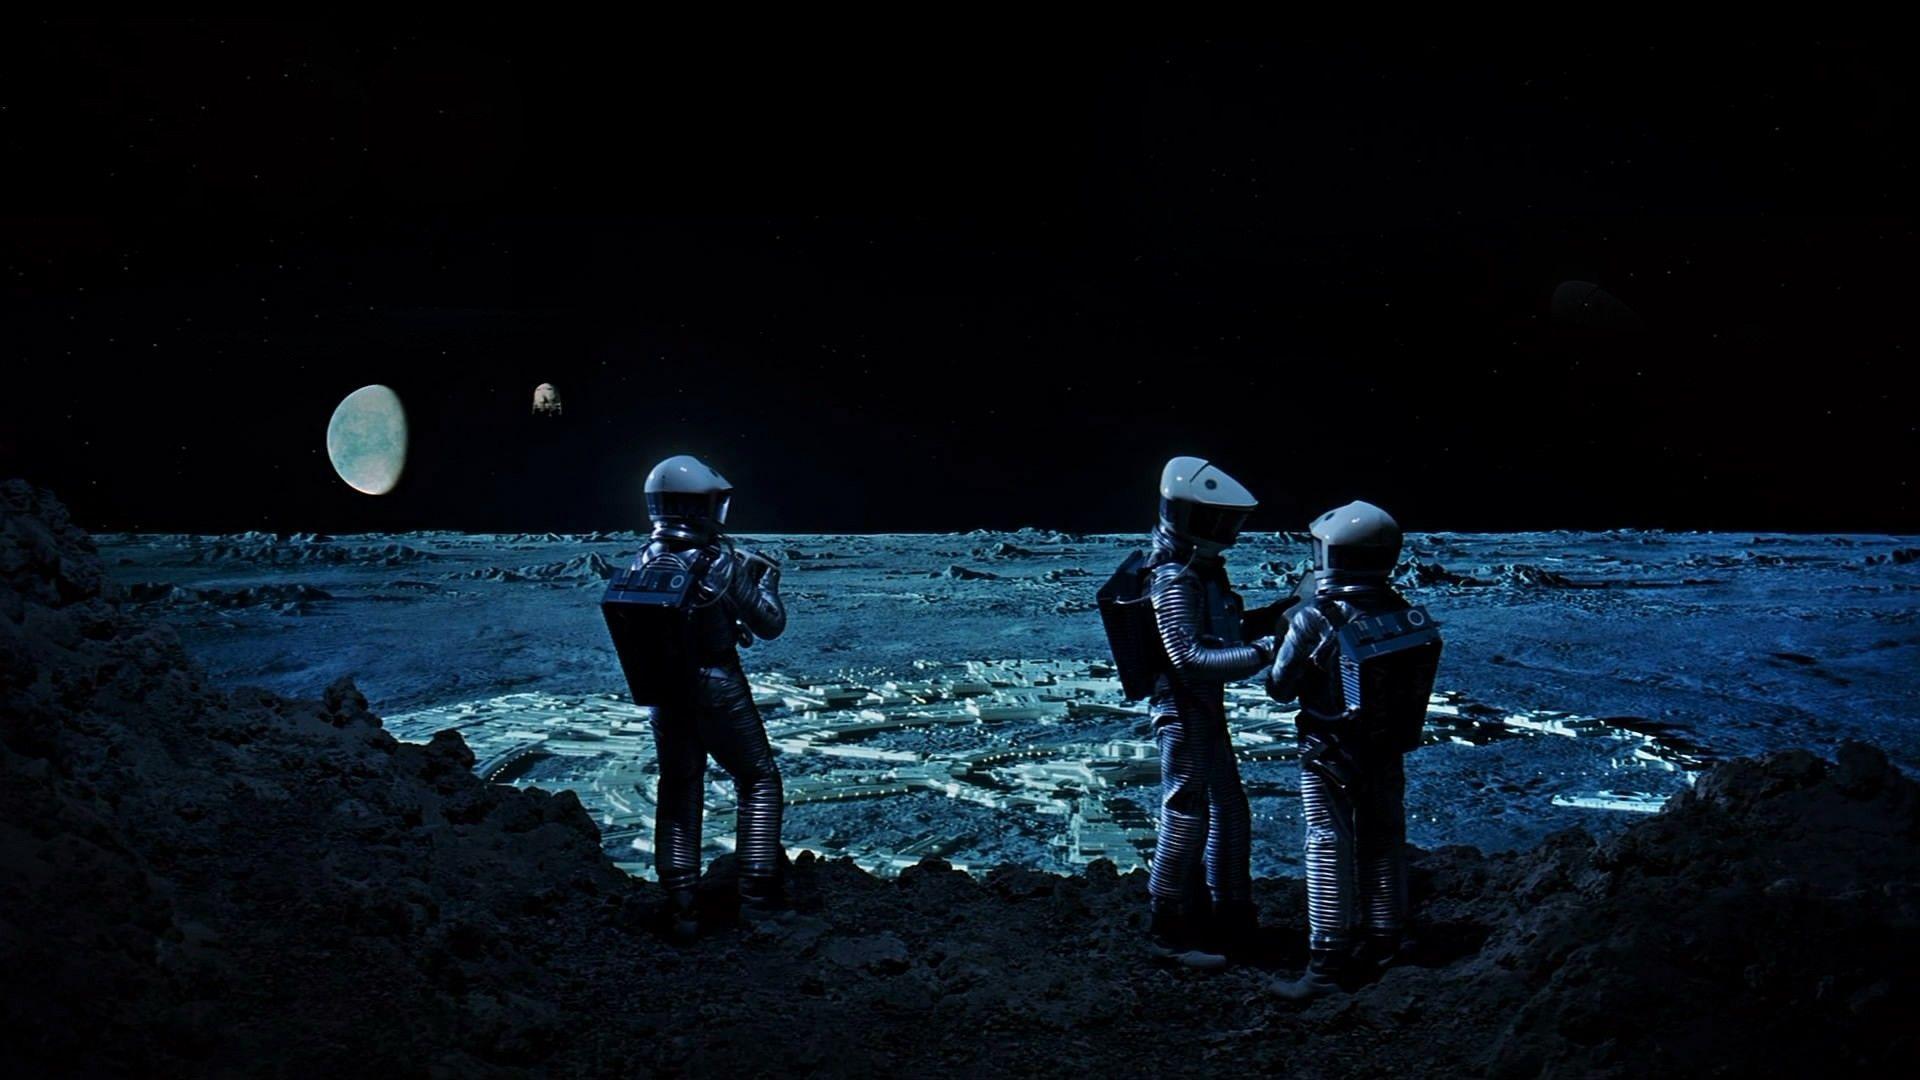 Movie 2001: A Space Odyssey Wallpaper 1920x1080 px Free Download